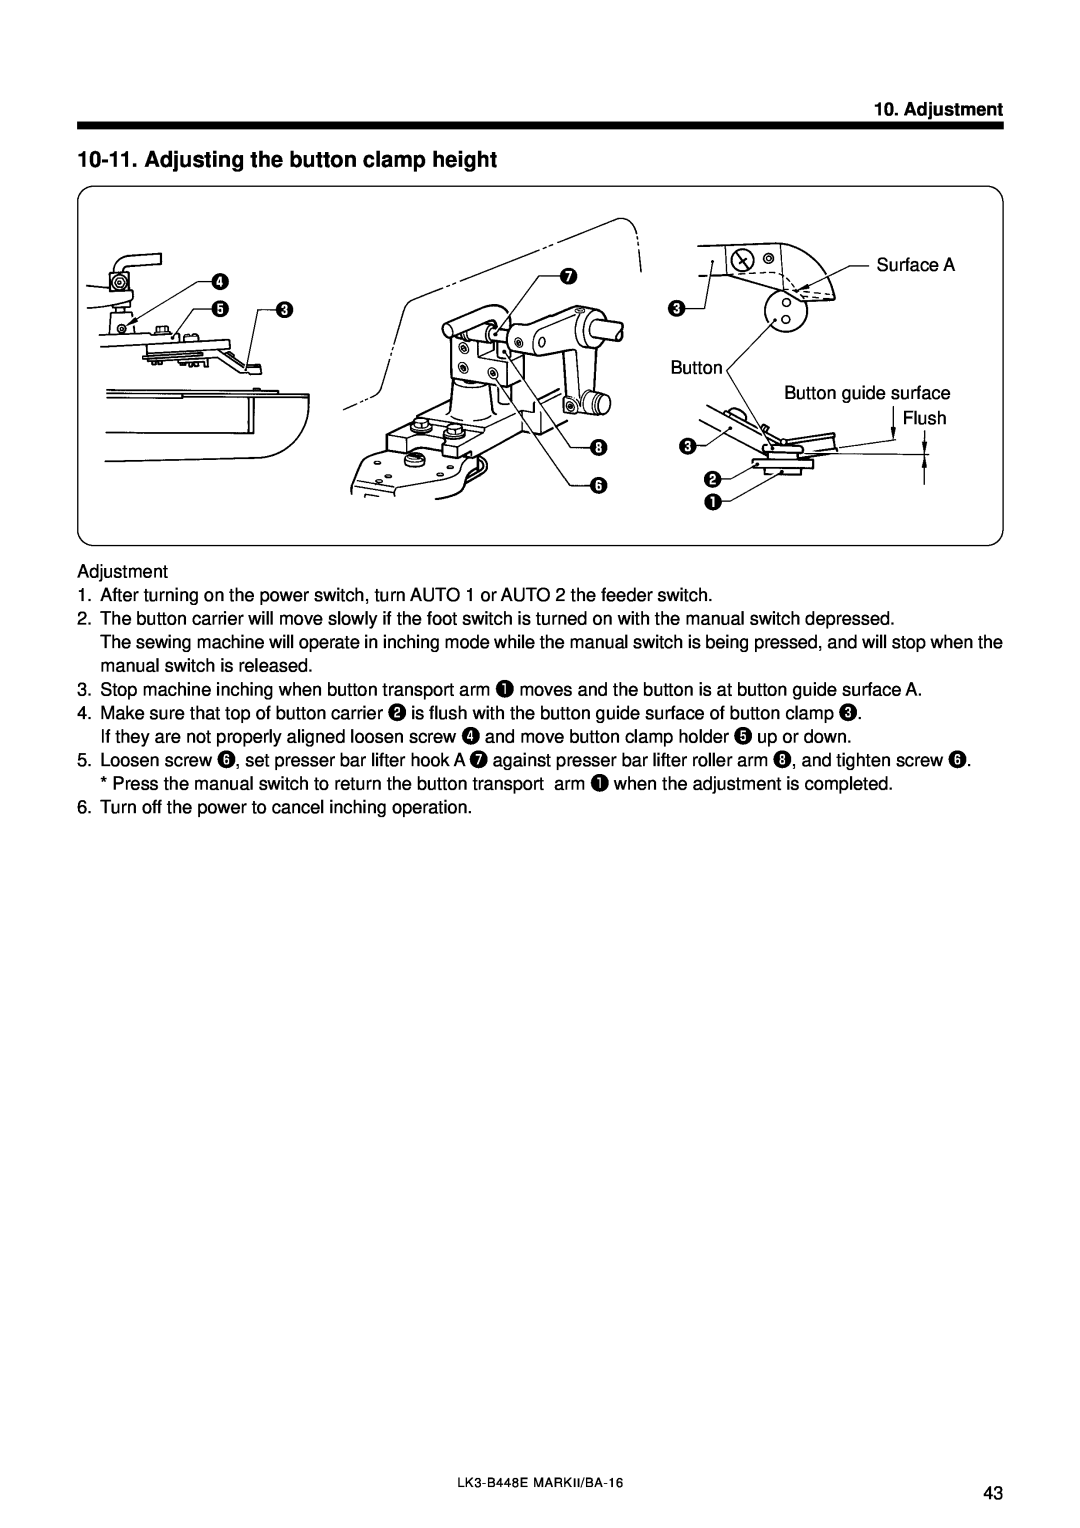 Brother LK3-B448E instruction manual Adjusting the button clamp height, Adjustment 